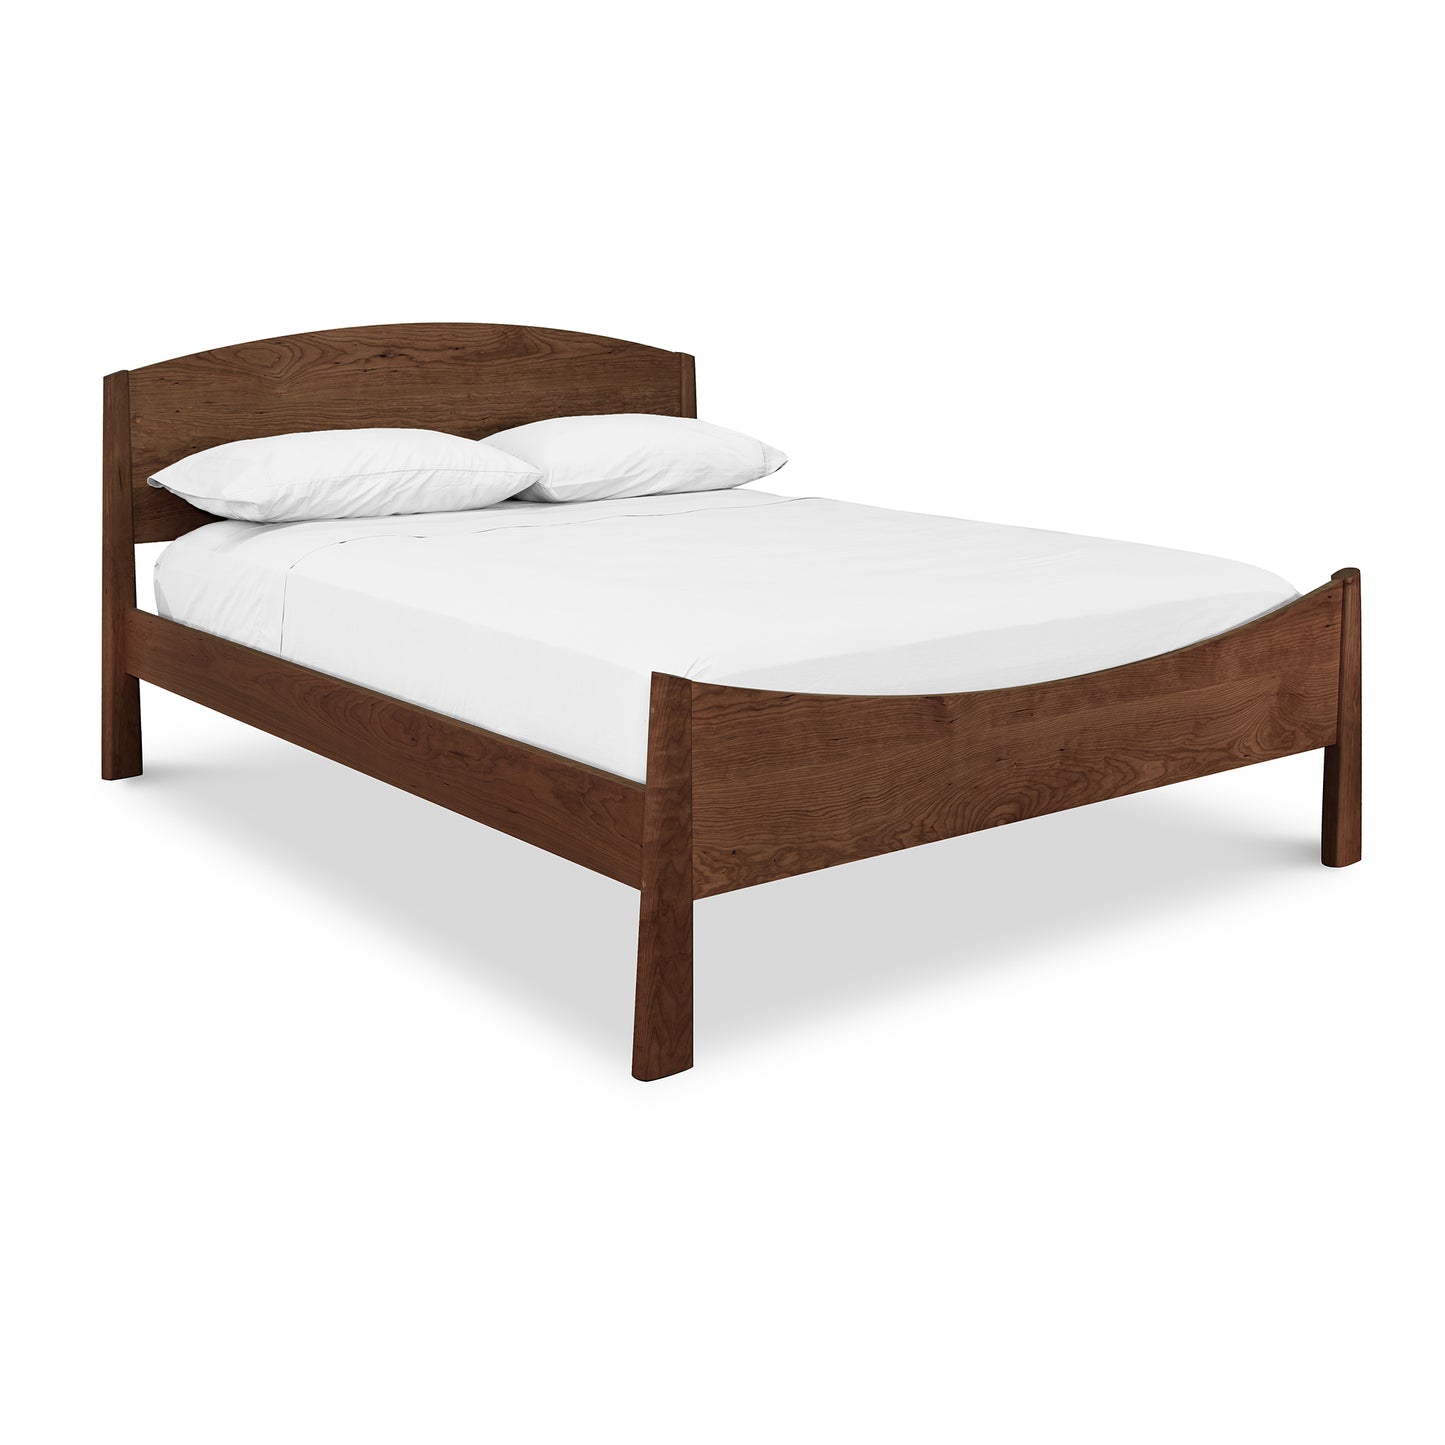 A Cherry Moon Bed crafted from sustainably harvested woods with a dark brown finish, featuring a high rectangular headboard and lower footboard, outfitted with a white mattress and two pillows by Maple Corner Woodworks.